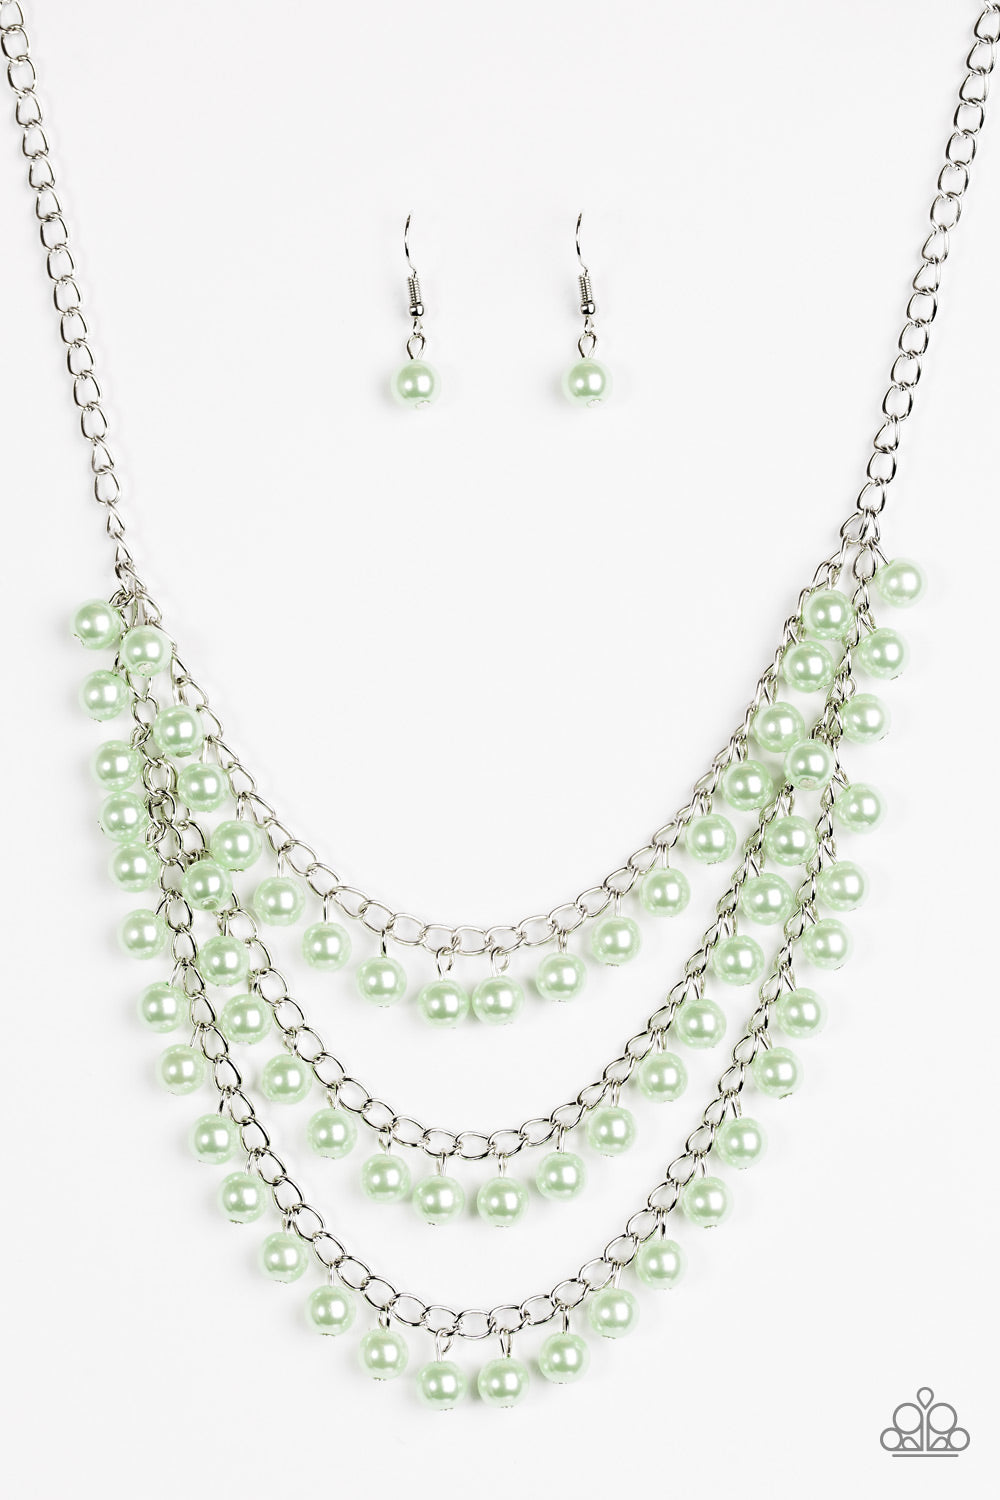 Chicly Classic Green Paparazzi Necklaces Cashmere Pink Jewels - Cashmere Pink Jewels & Accessories, Cashmere Pink Jewels & Accessories - Paparazzi